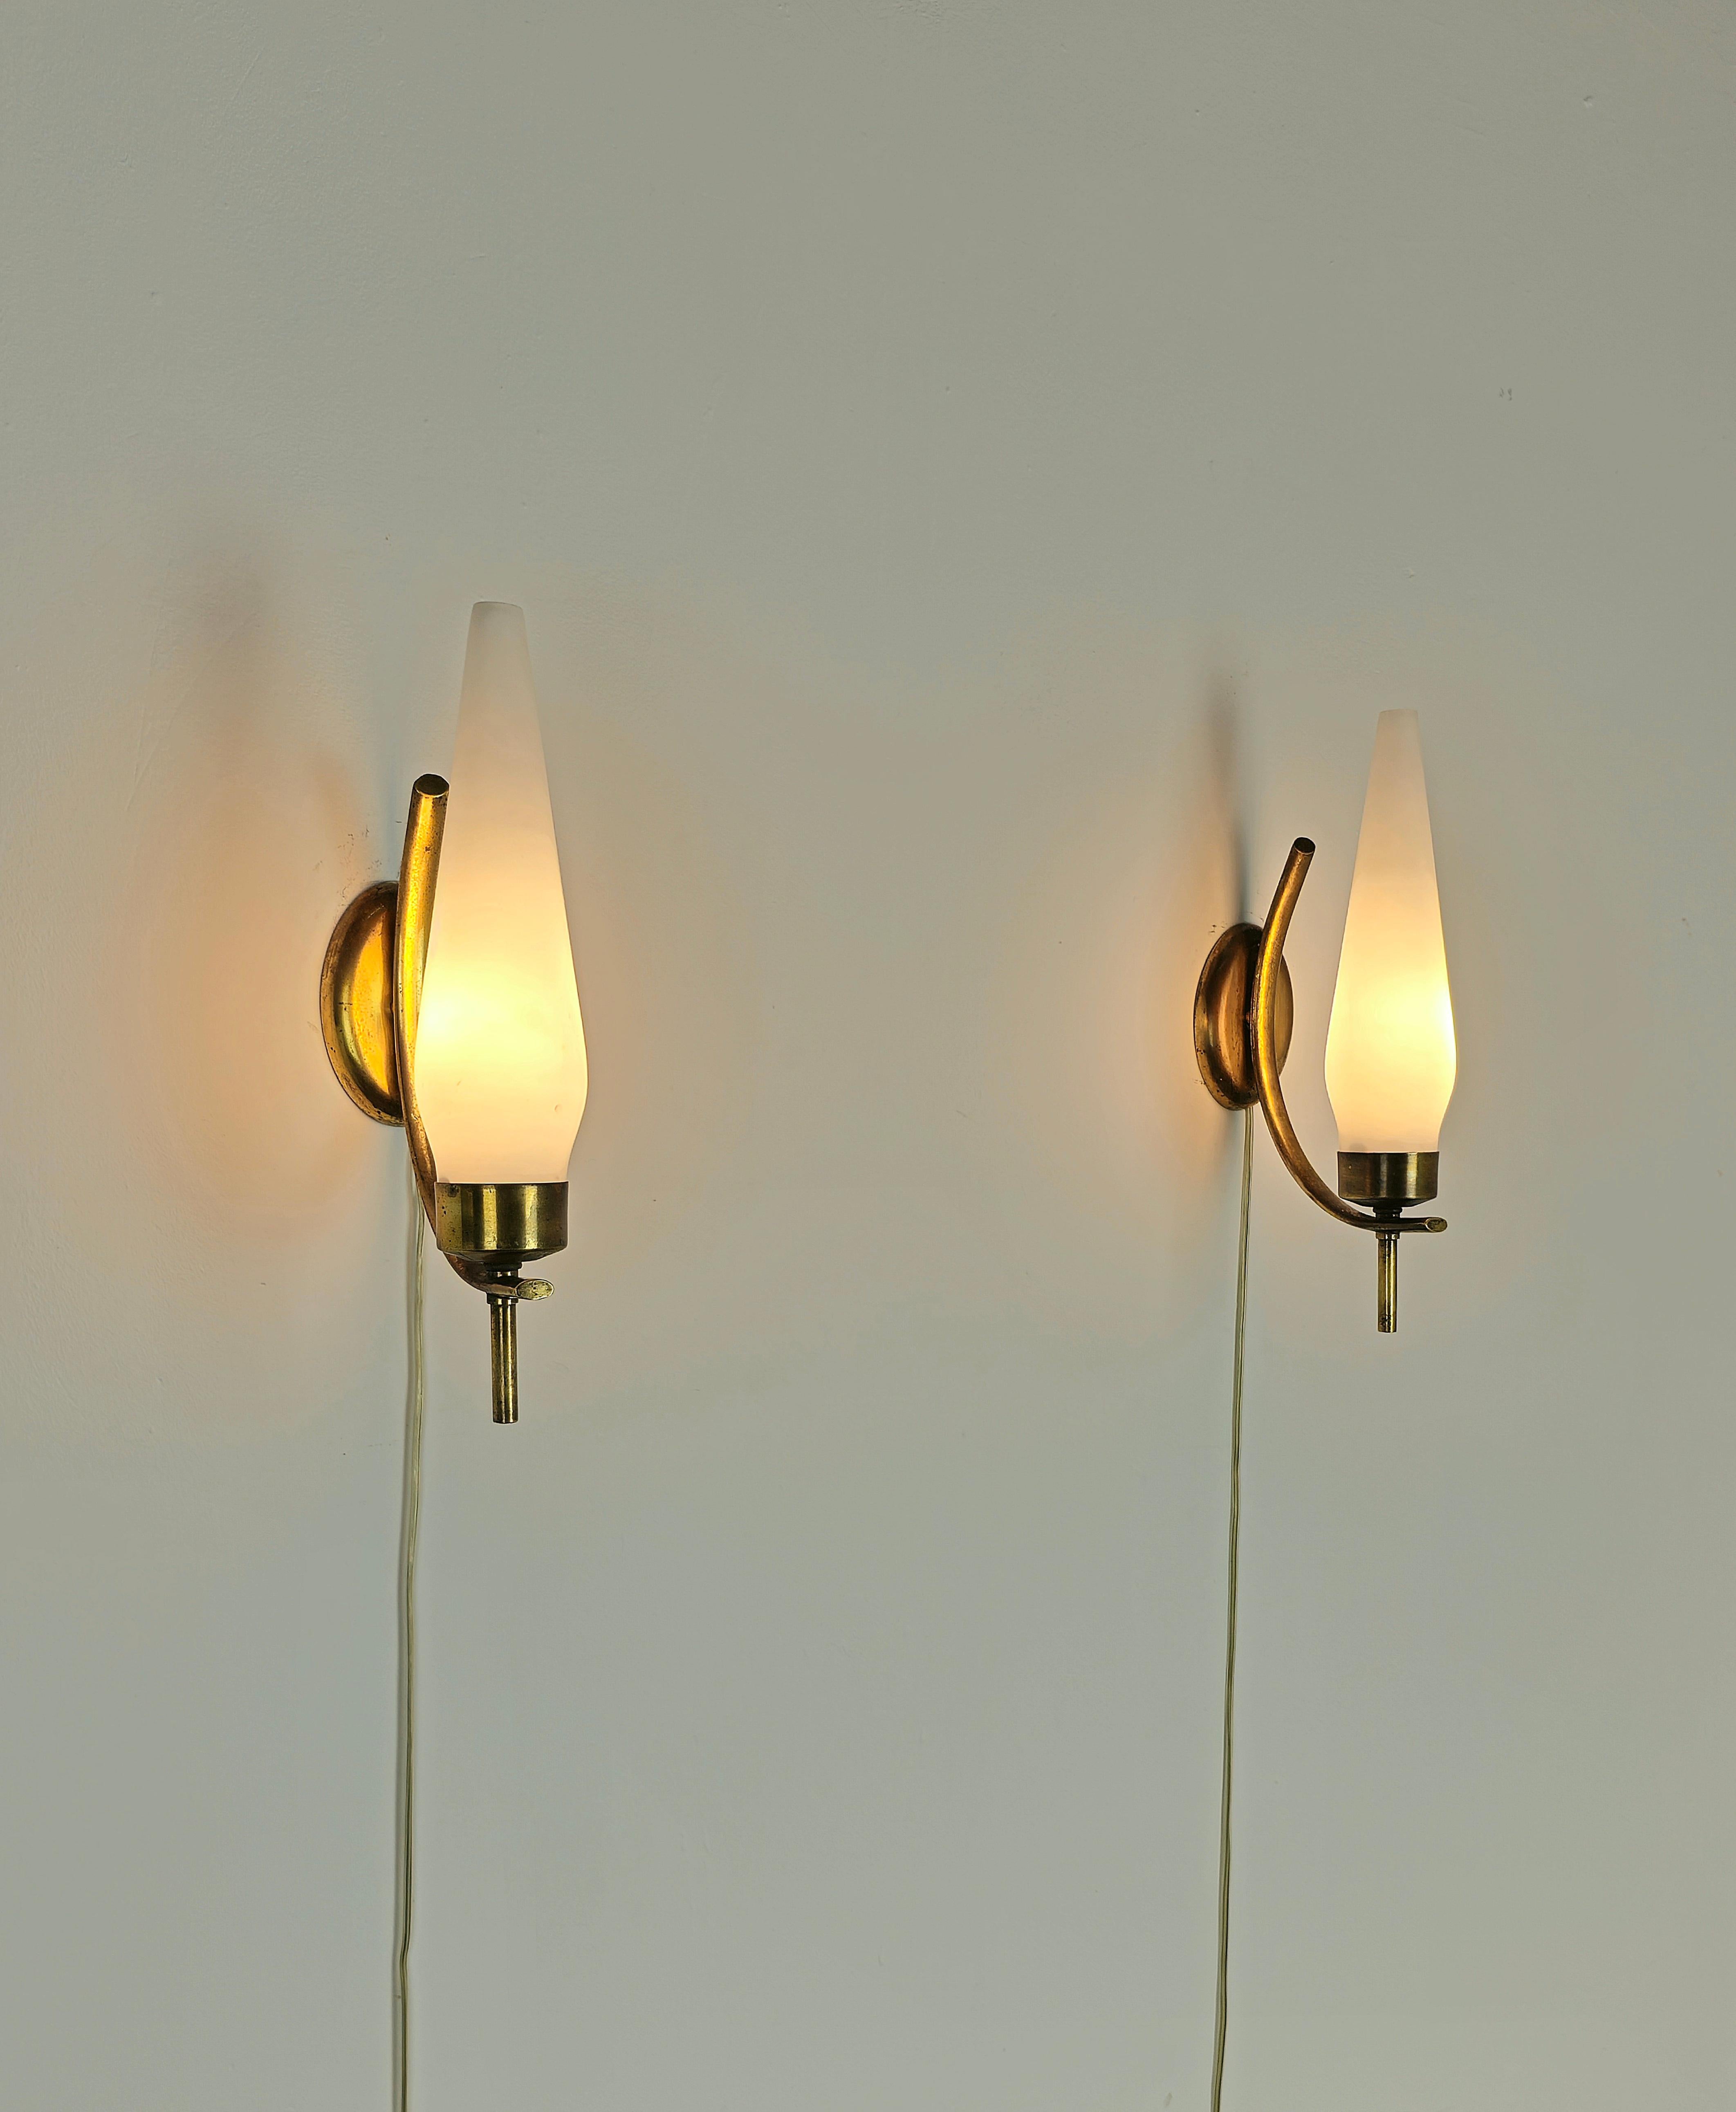 Pair of Wall Lights Sconces Brass Opaline Glass Midcentury Italian Design 1960s  For Sale 6